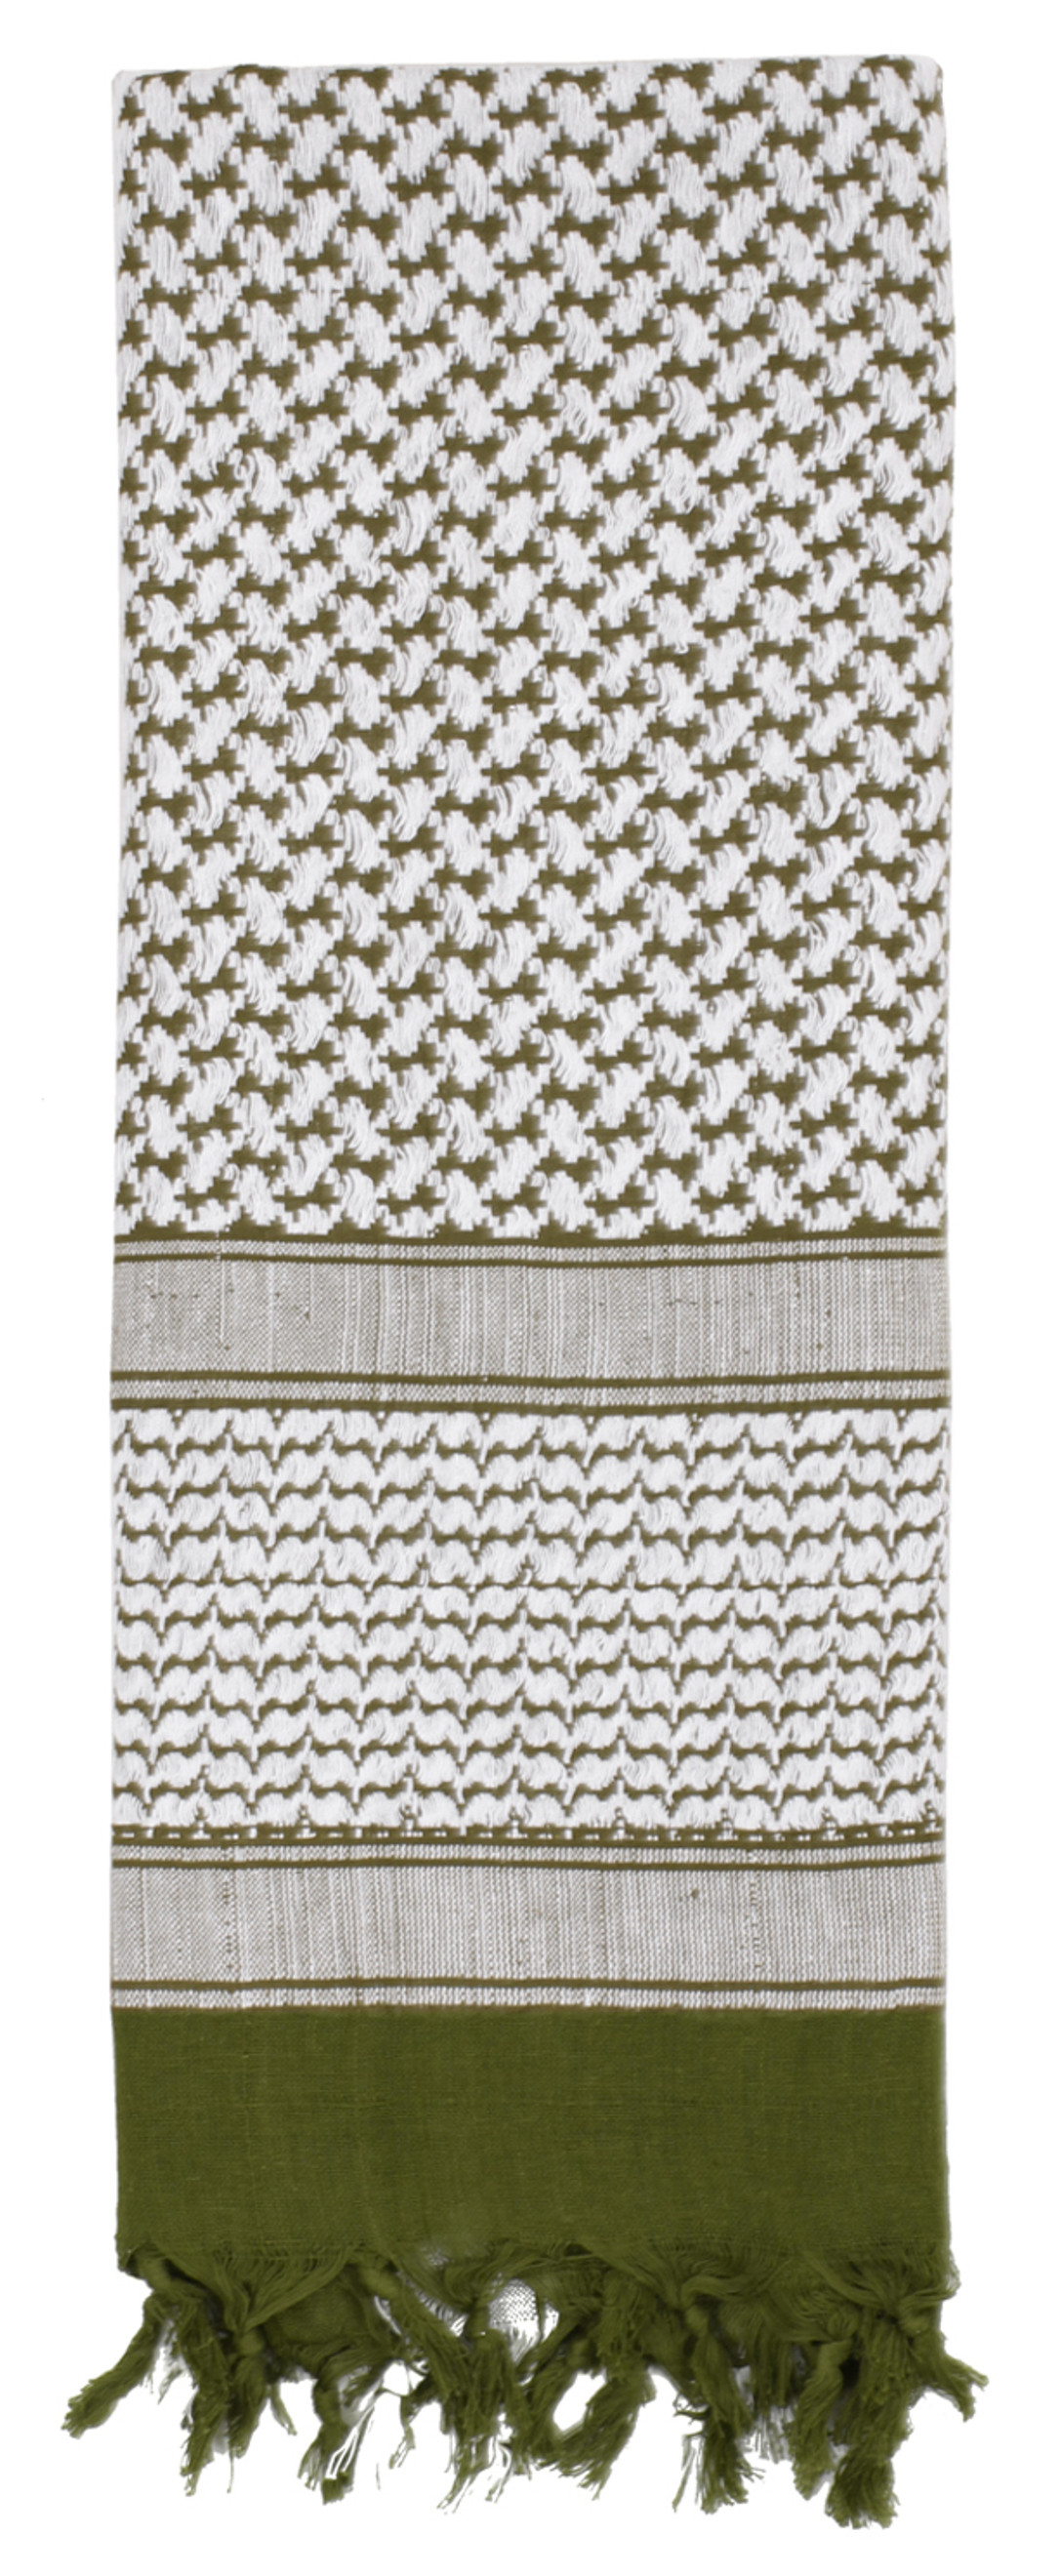 Rothco Shemagh Tactical Desert Keffiyeh Scarf - Olive Drab/White